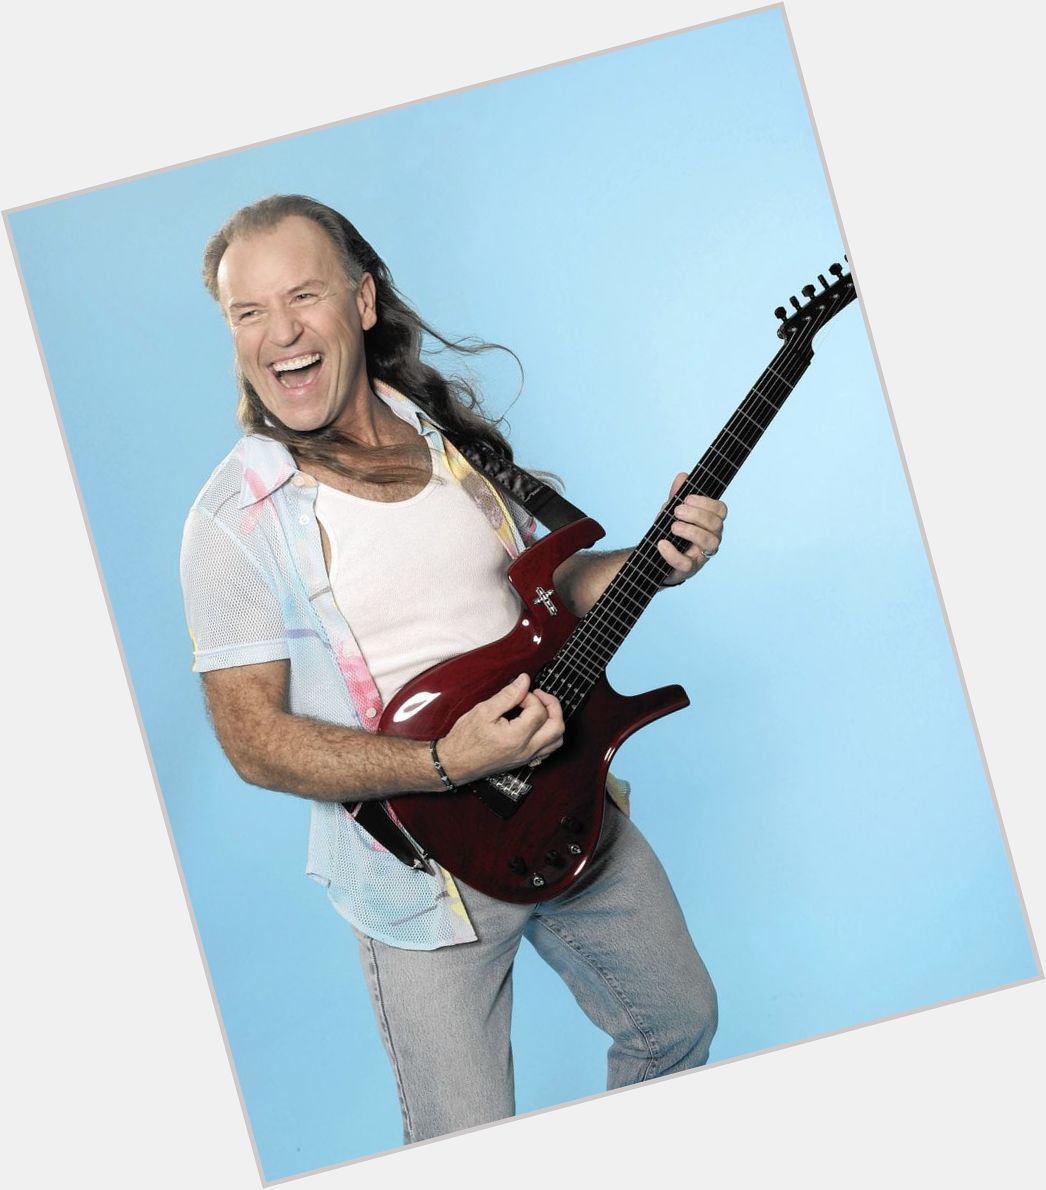 Happy 73 birthday to the amazing former Grand Funk Railroad singer and guitarist Mark Farner! 